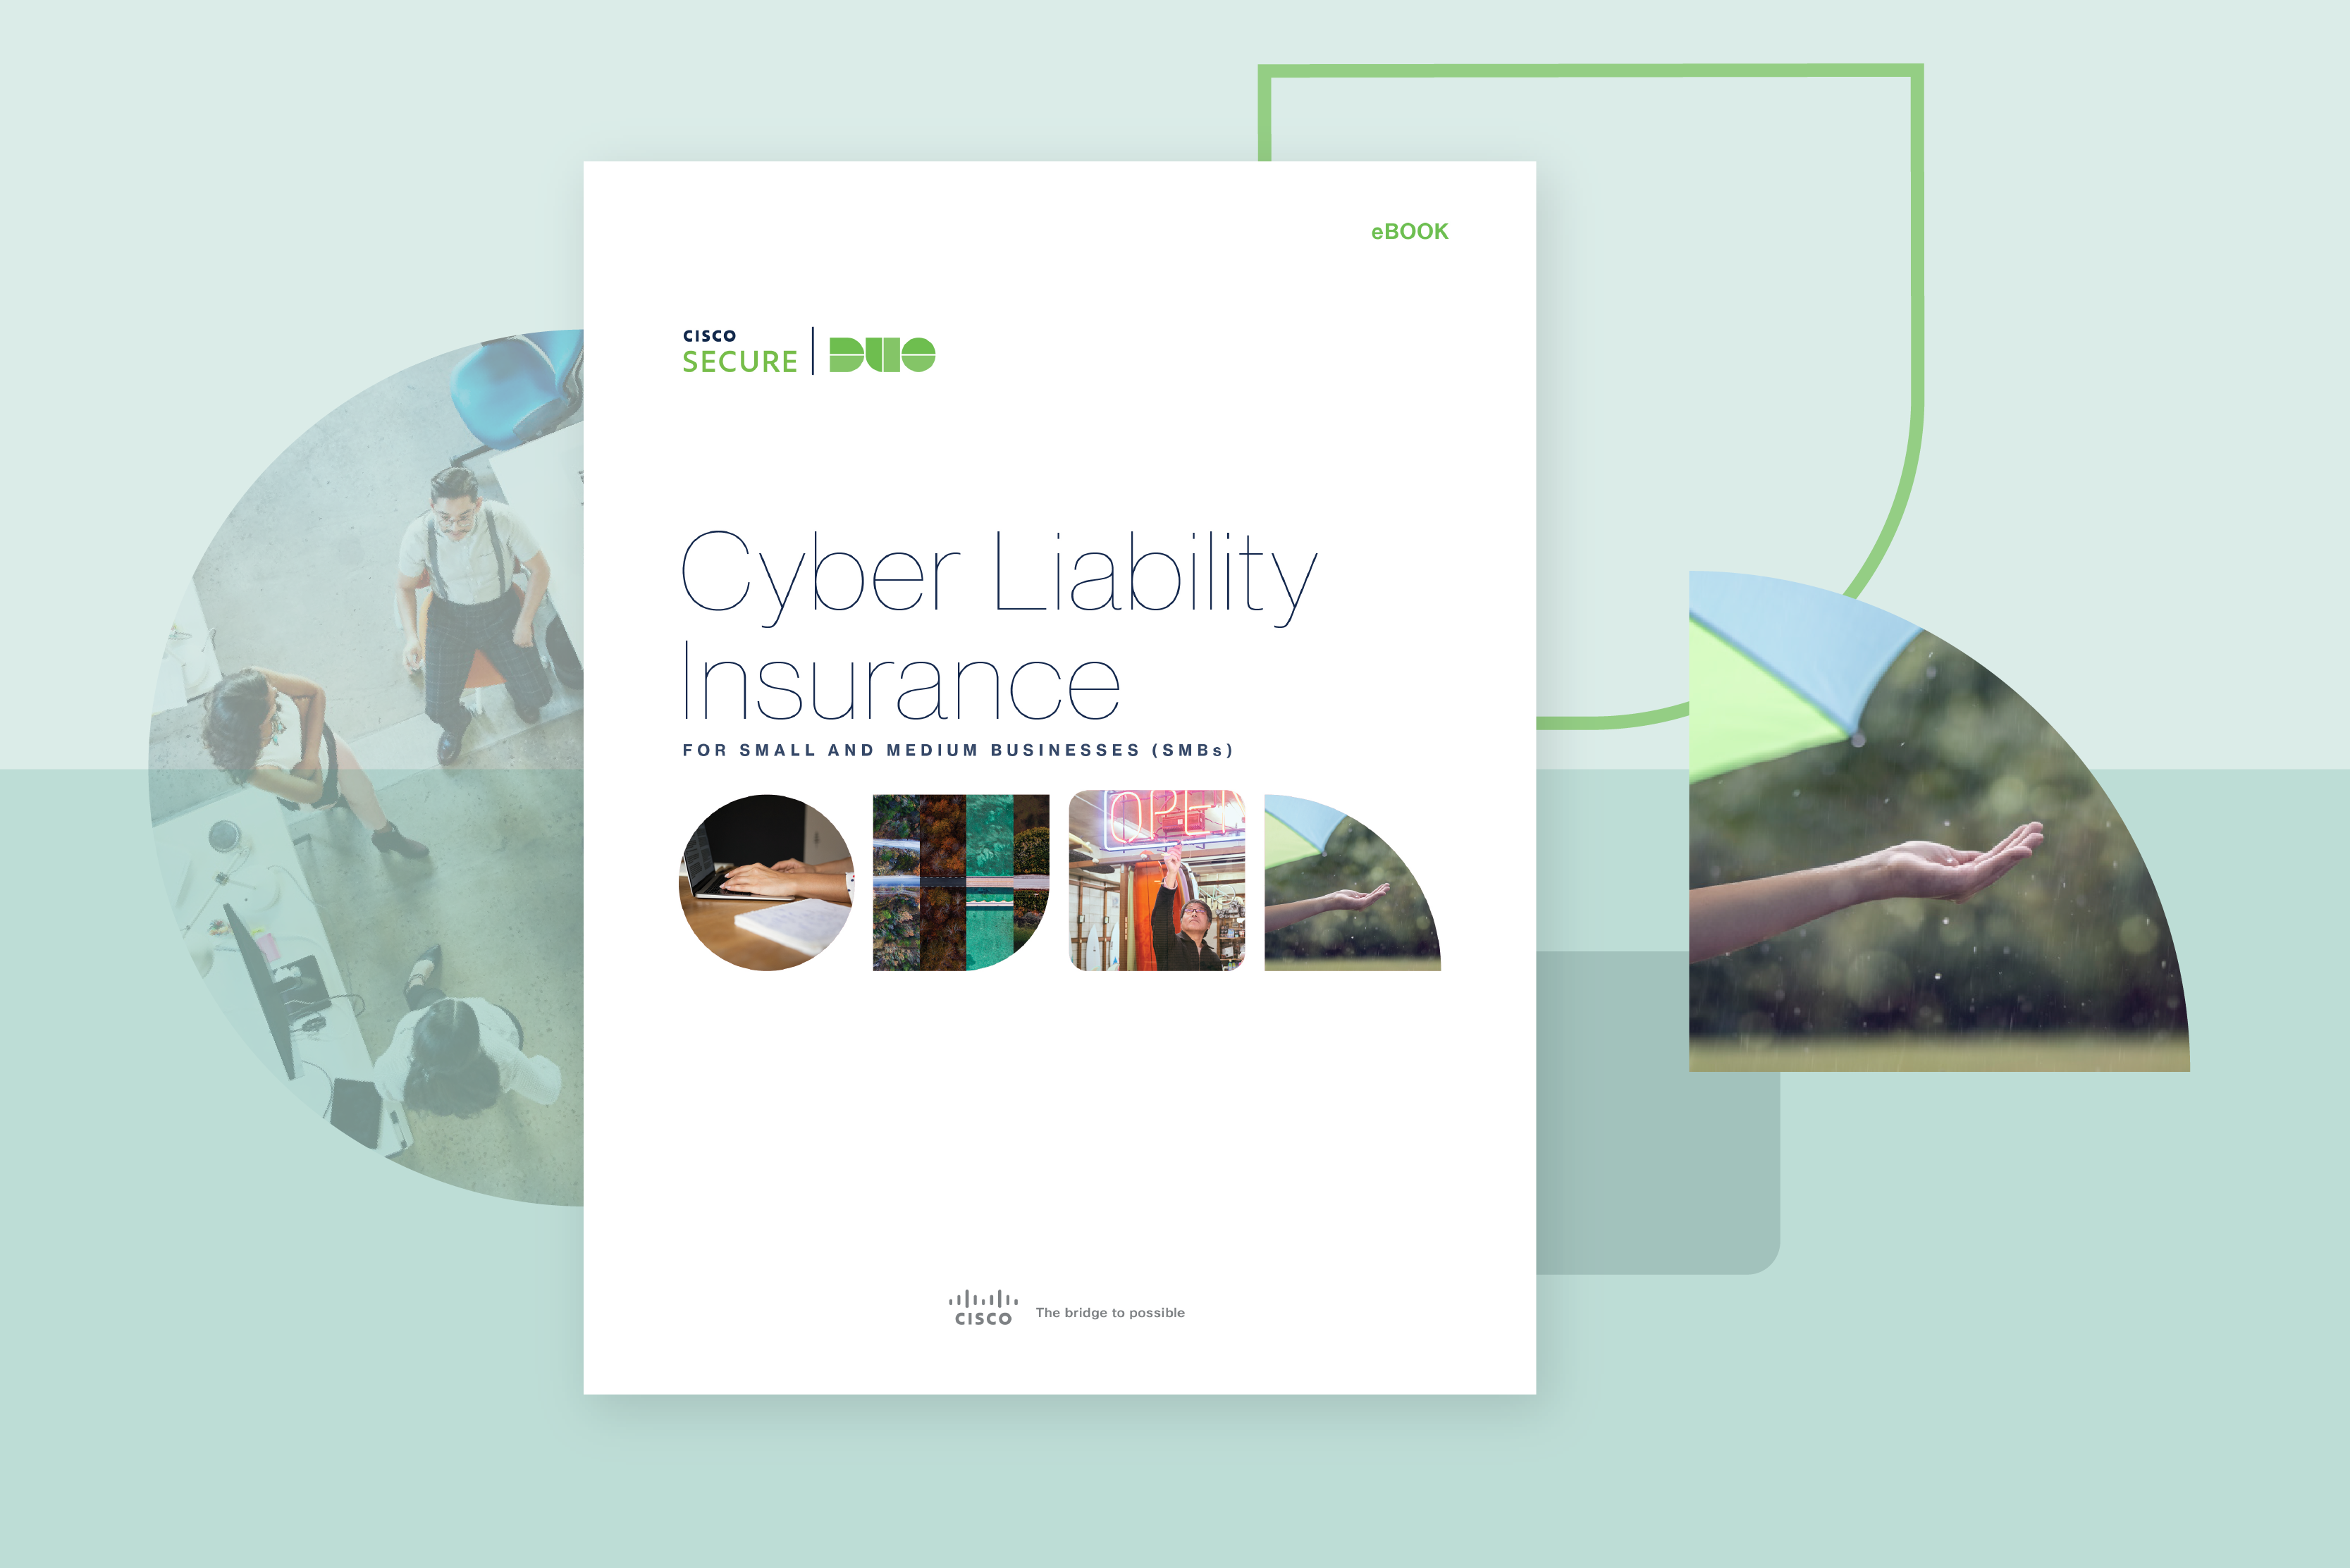 Download Our Cyber Liability Insurance for Small and Medium Businesses Guide